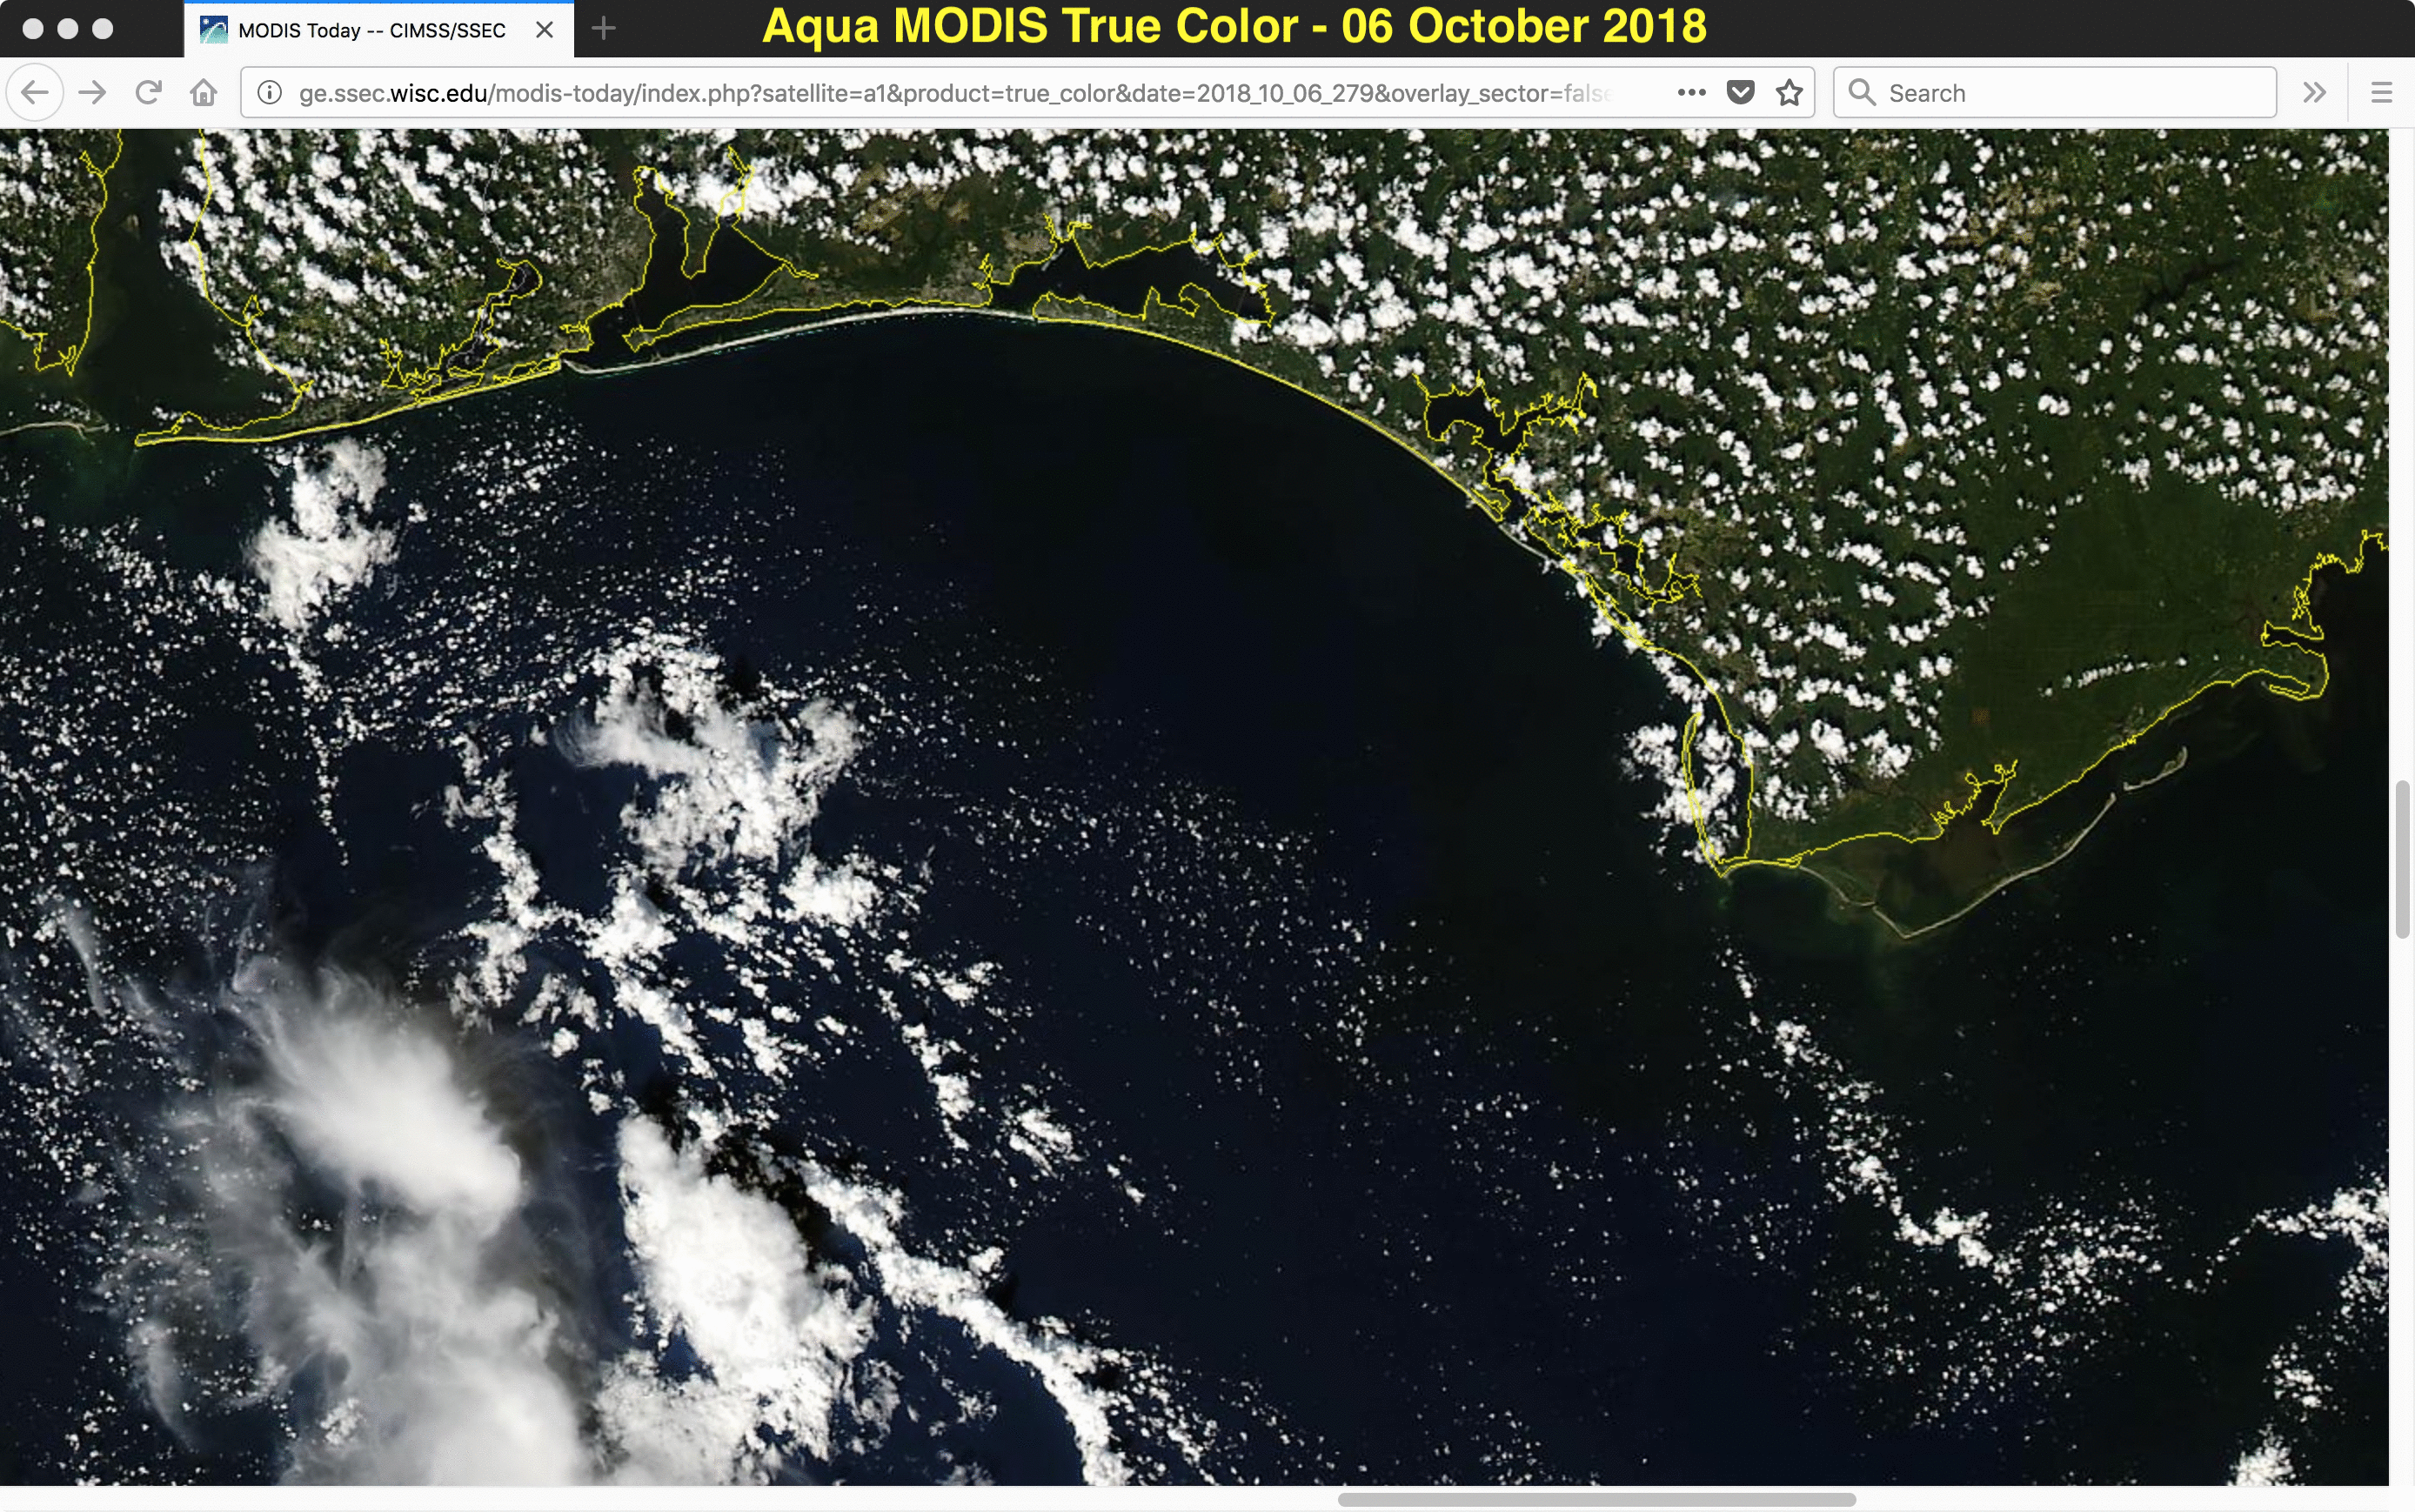 Aqua MODIS True Color RGB images from 06 October and 11 October [click to enlarge]